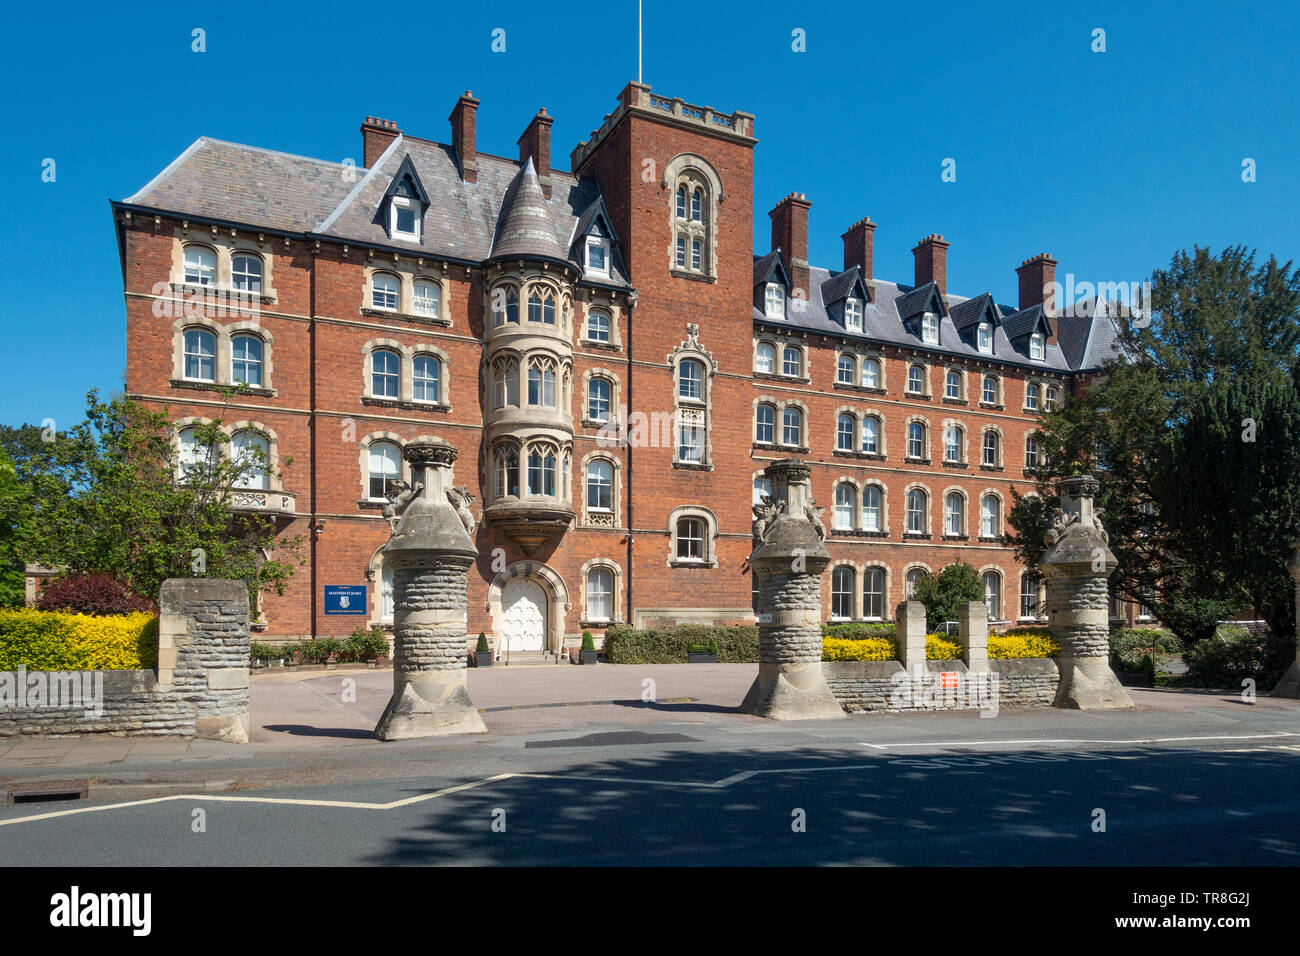 The front elevation of Malvern St James' School, a private school occupying the former Imperial Hotel, built c1969. Victorian architecture, oriel wind Stock Photo